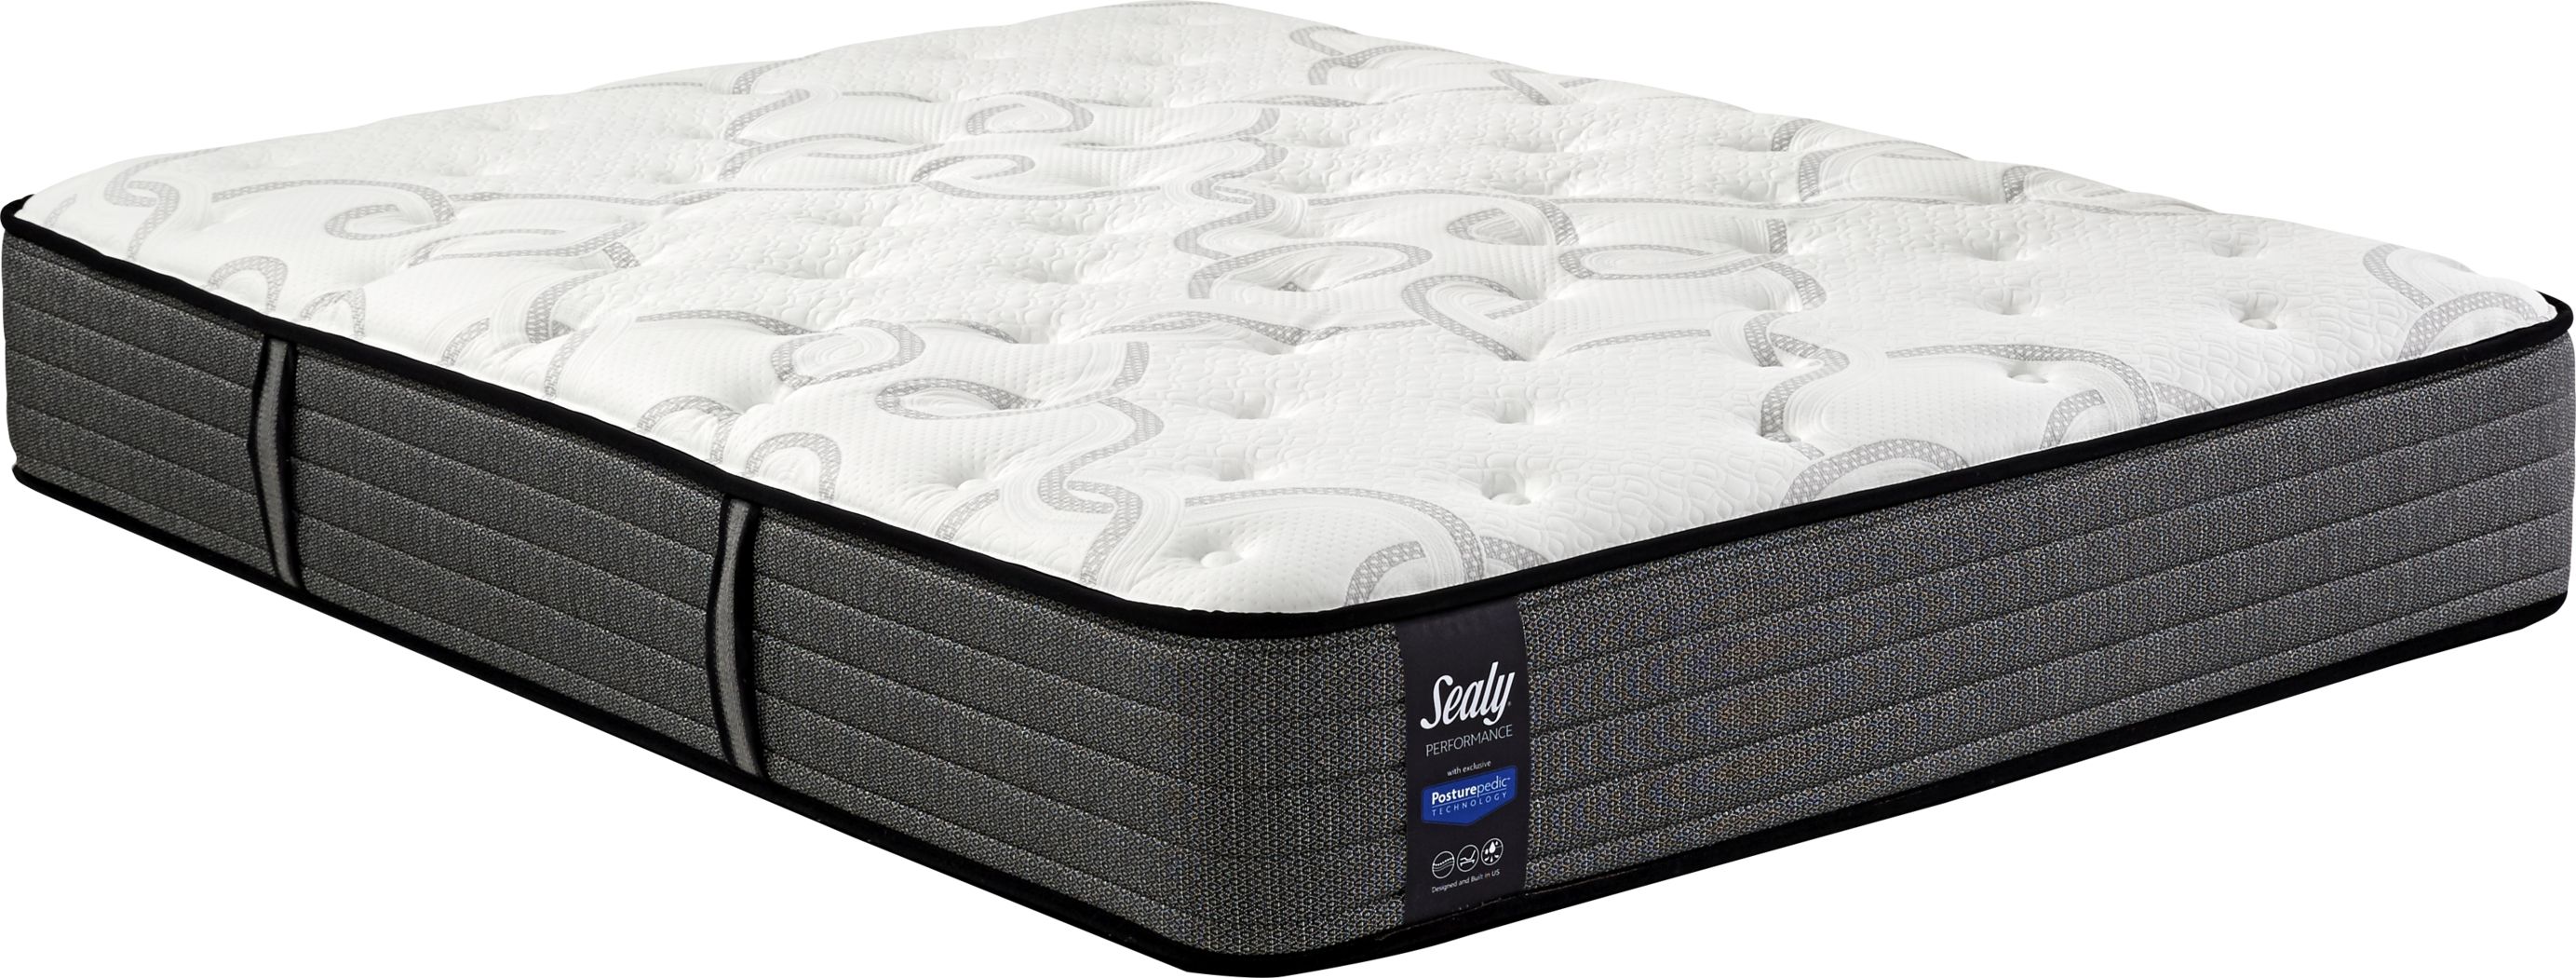 avg price for sealy king mattress